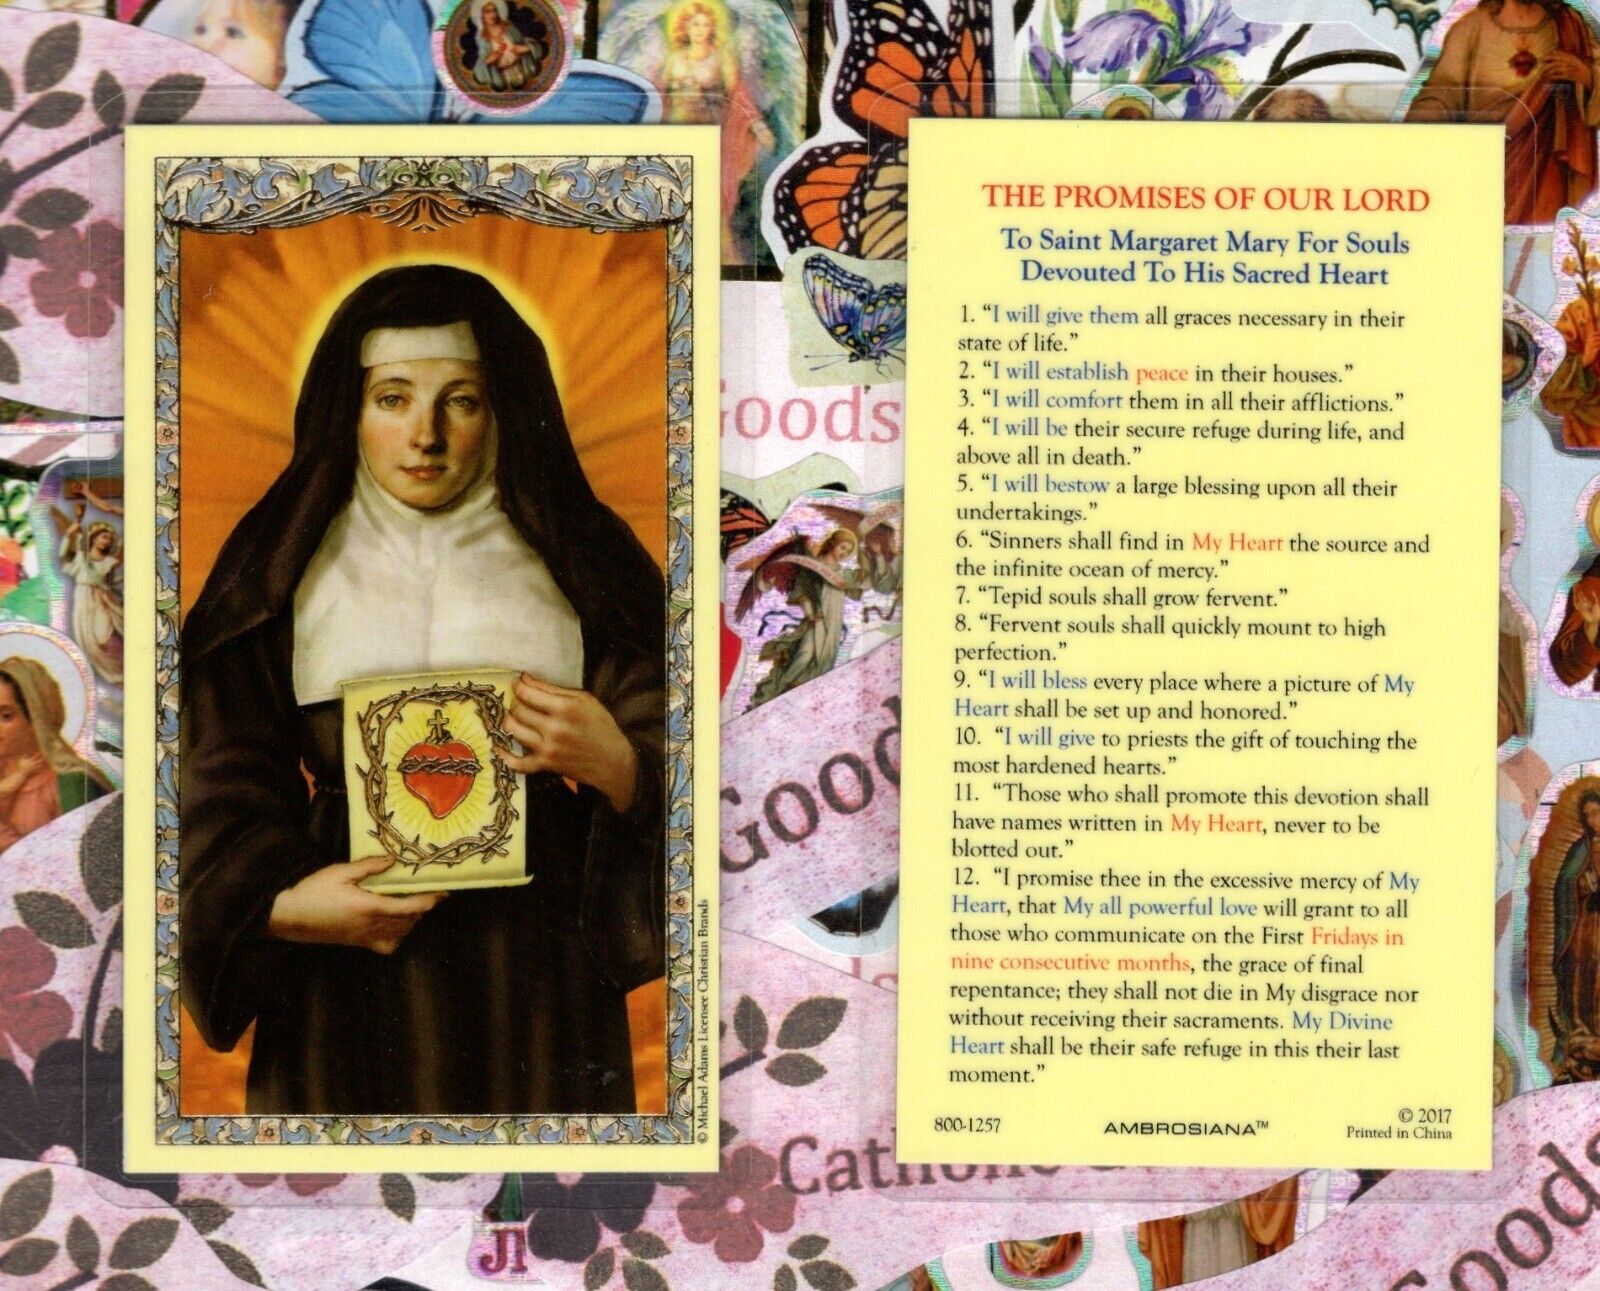 Saint St. Margaret Mary - Promises of Our Lord - Laminated Holy Card 800-1257